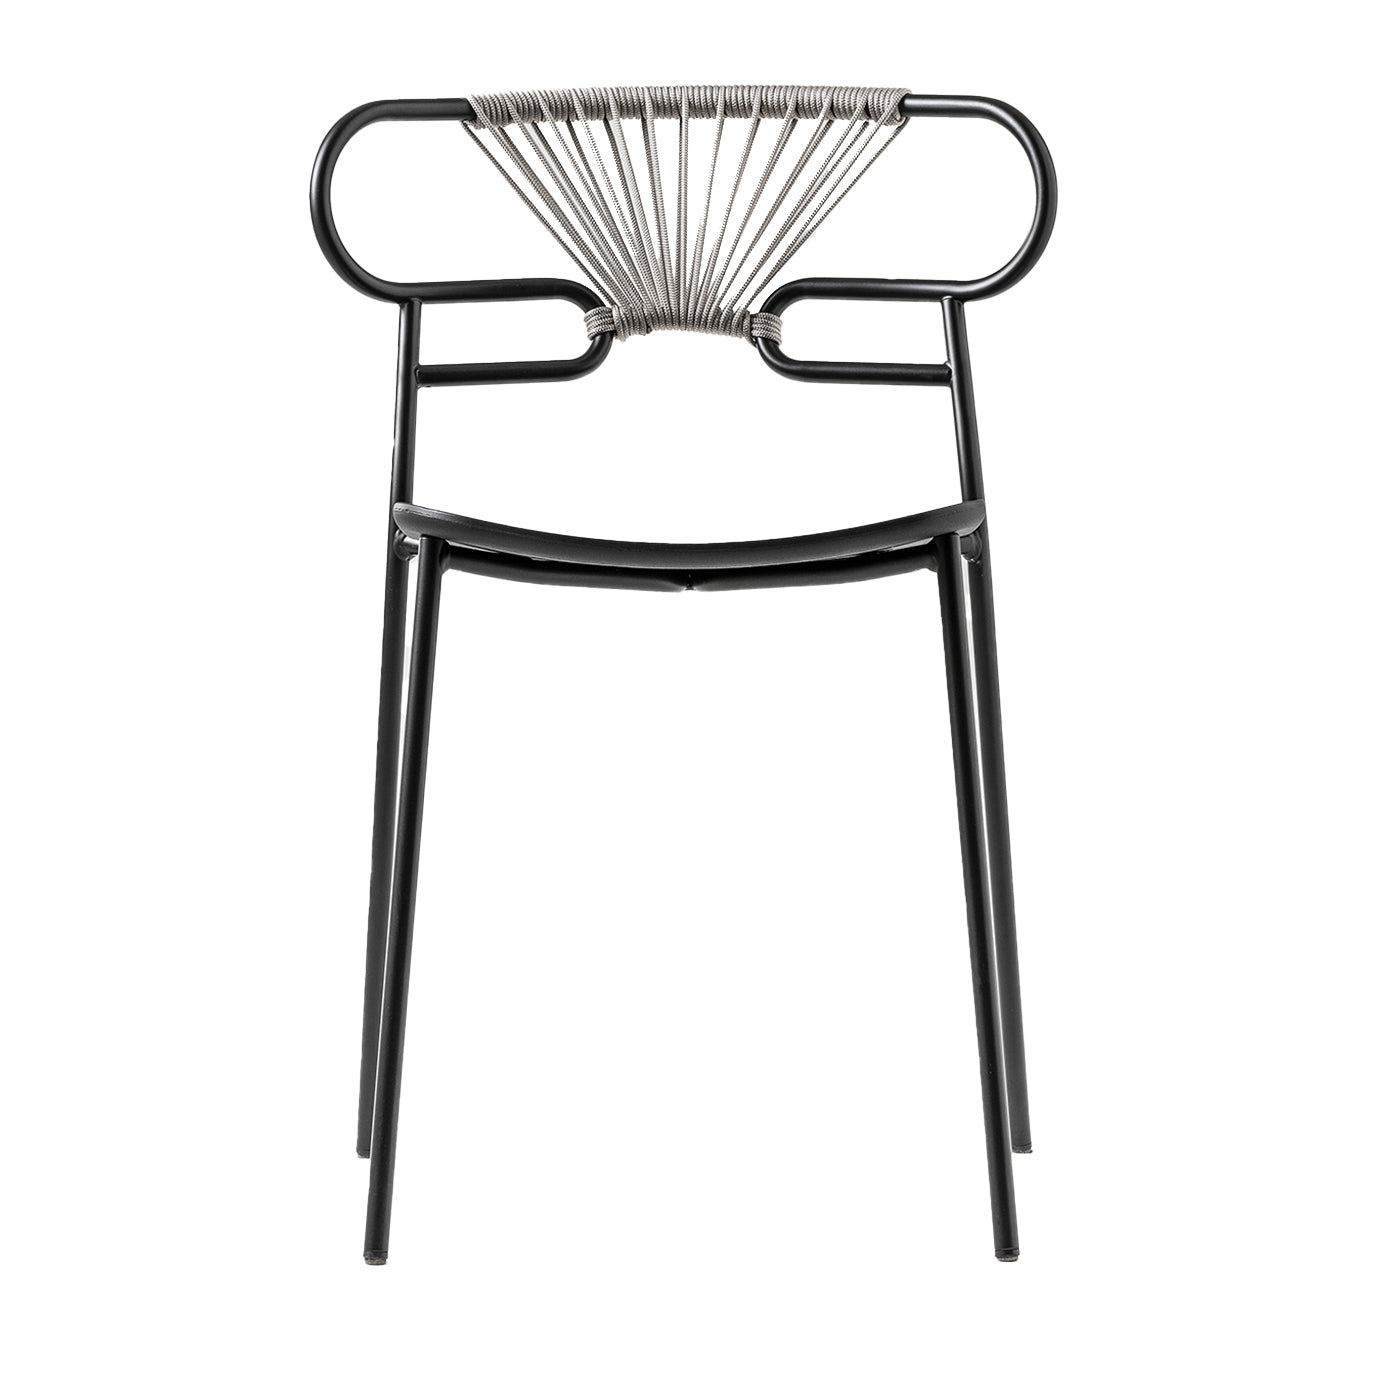 Genoa Chair with Gray Rope #2 by Cesare Ehr - Main view